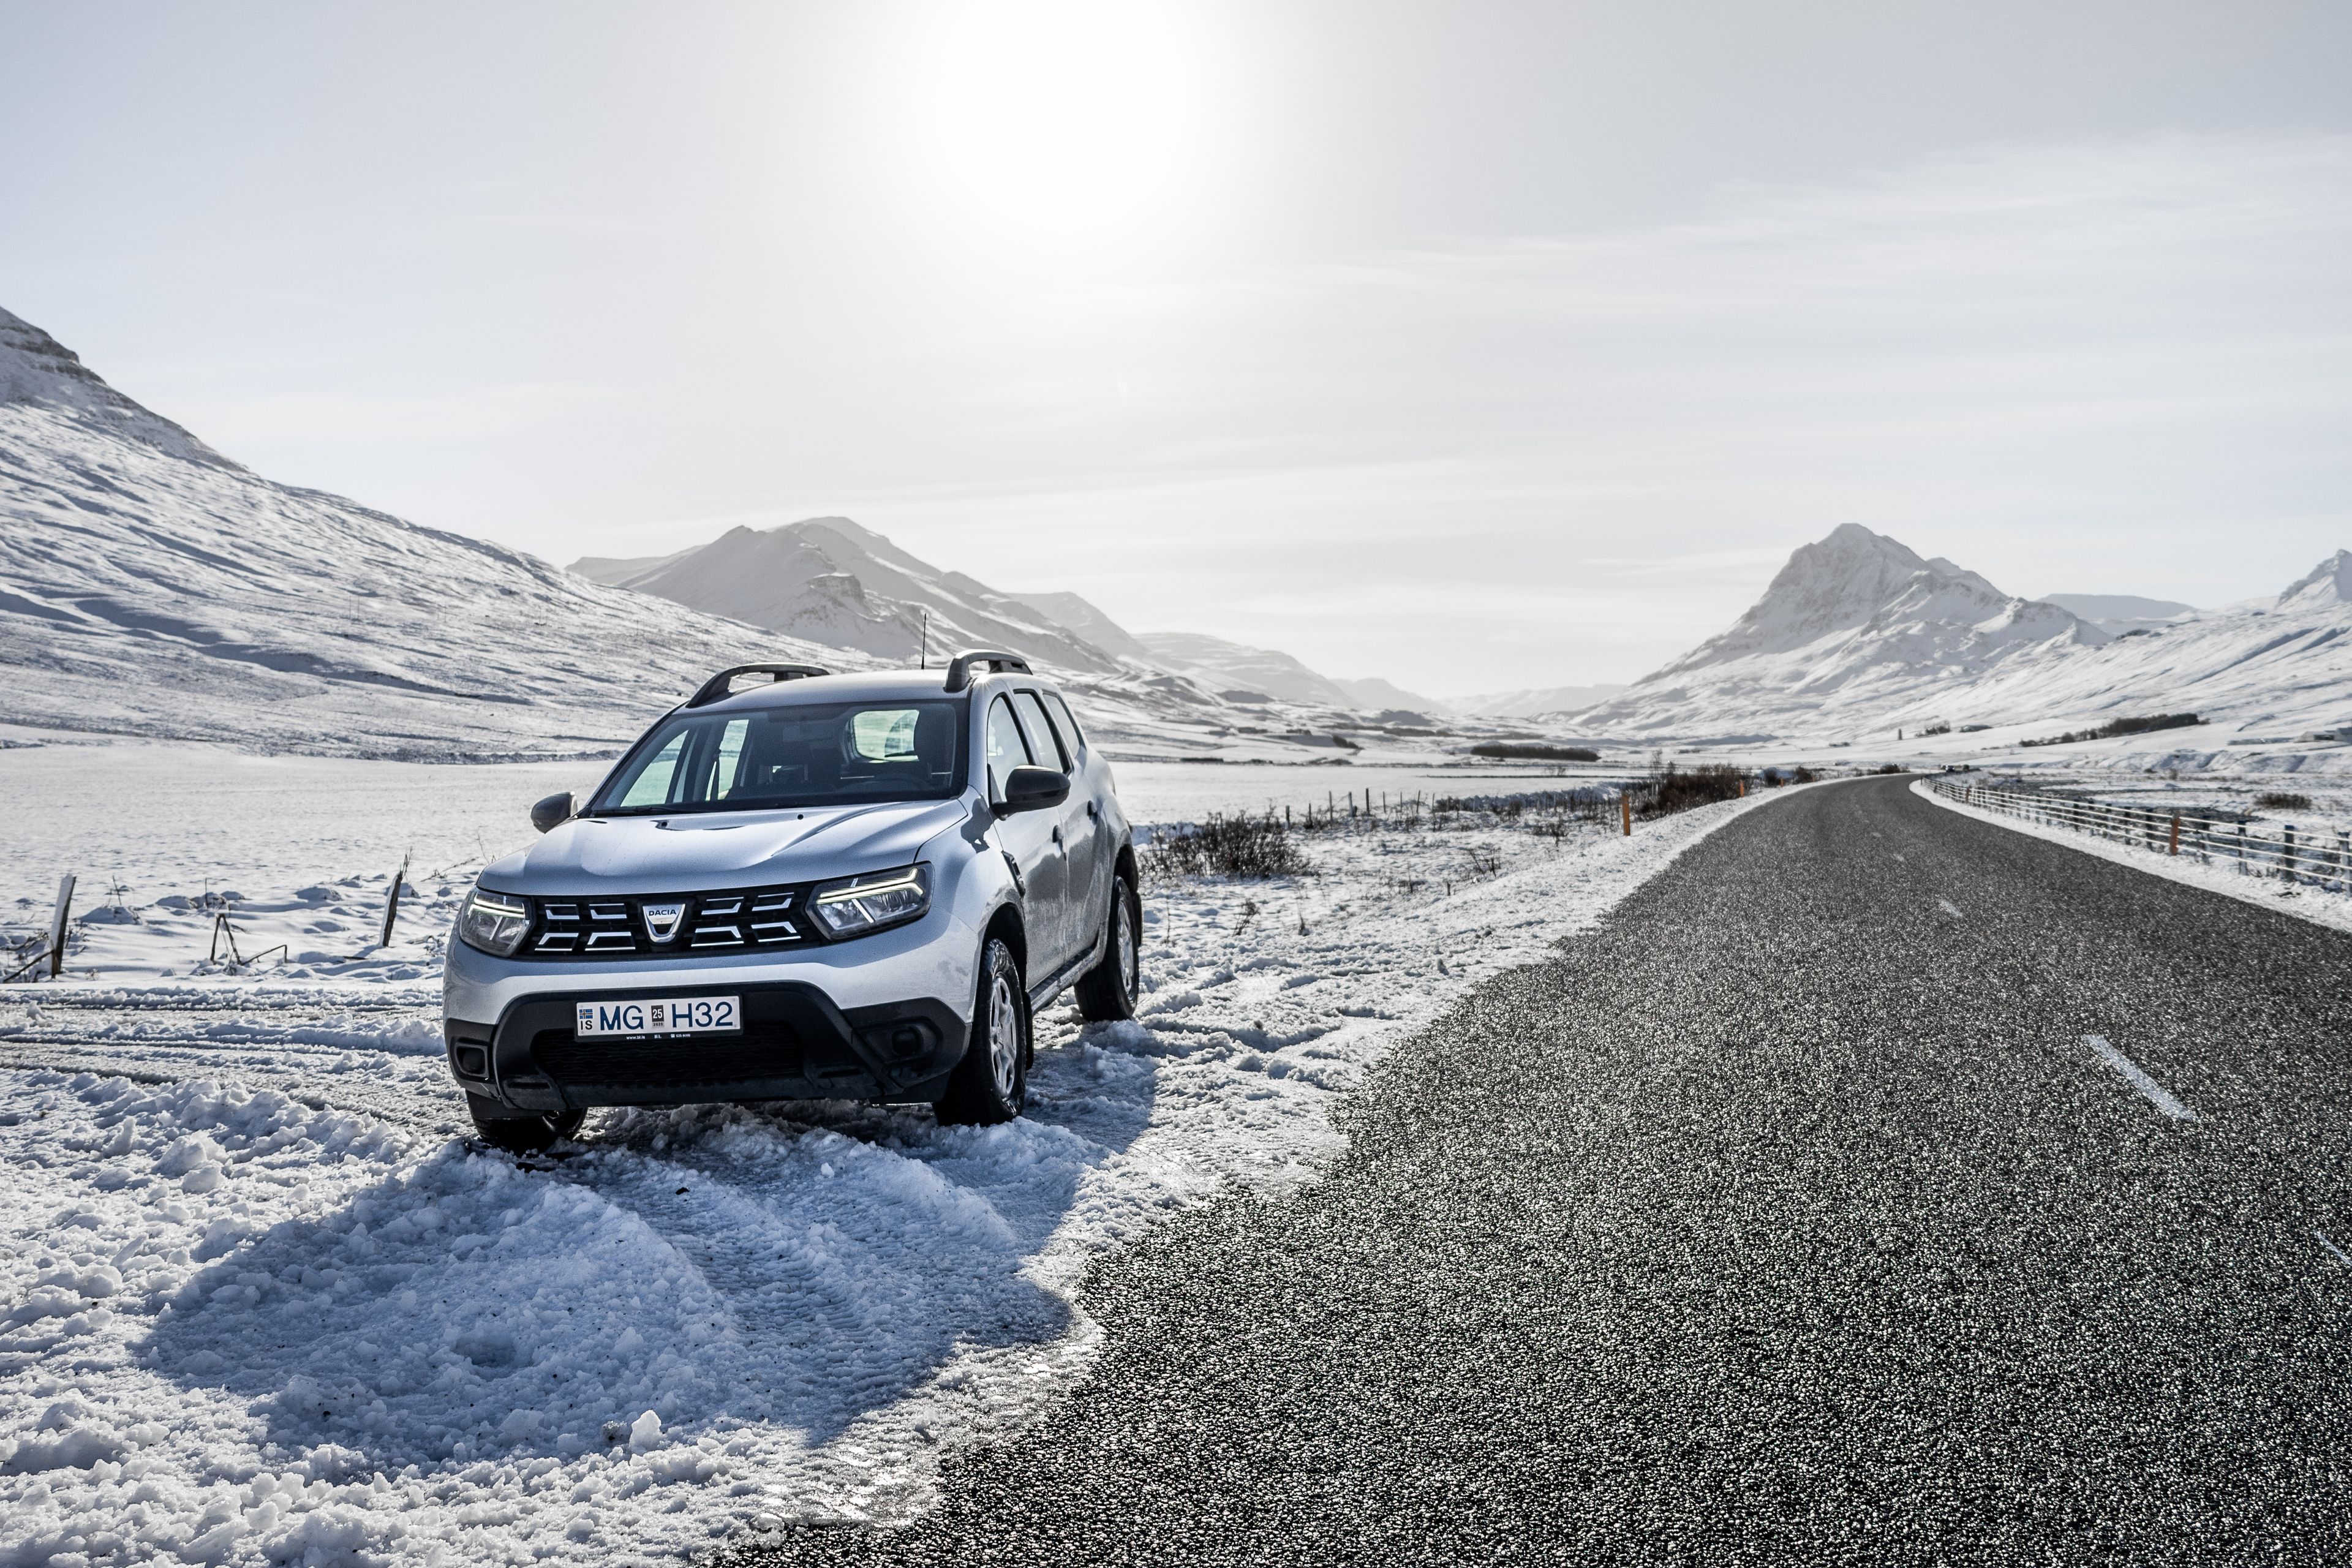 A dacia Duster parked on a road in winter in Iceland 